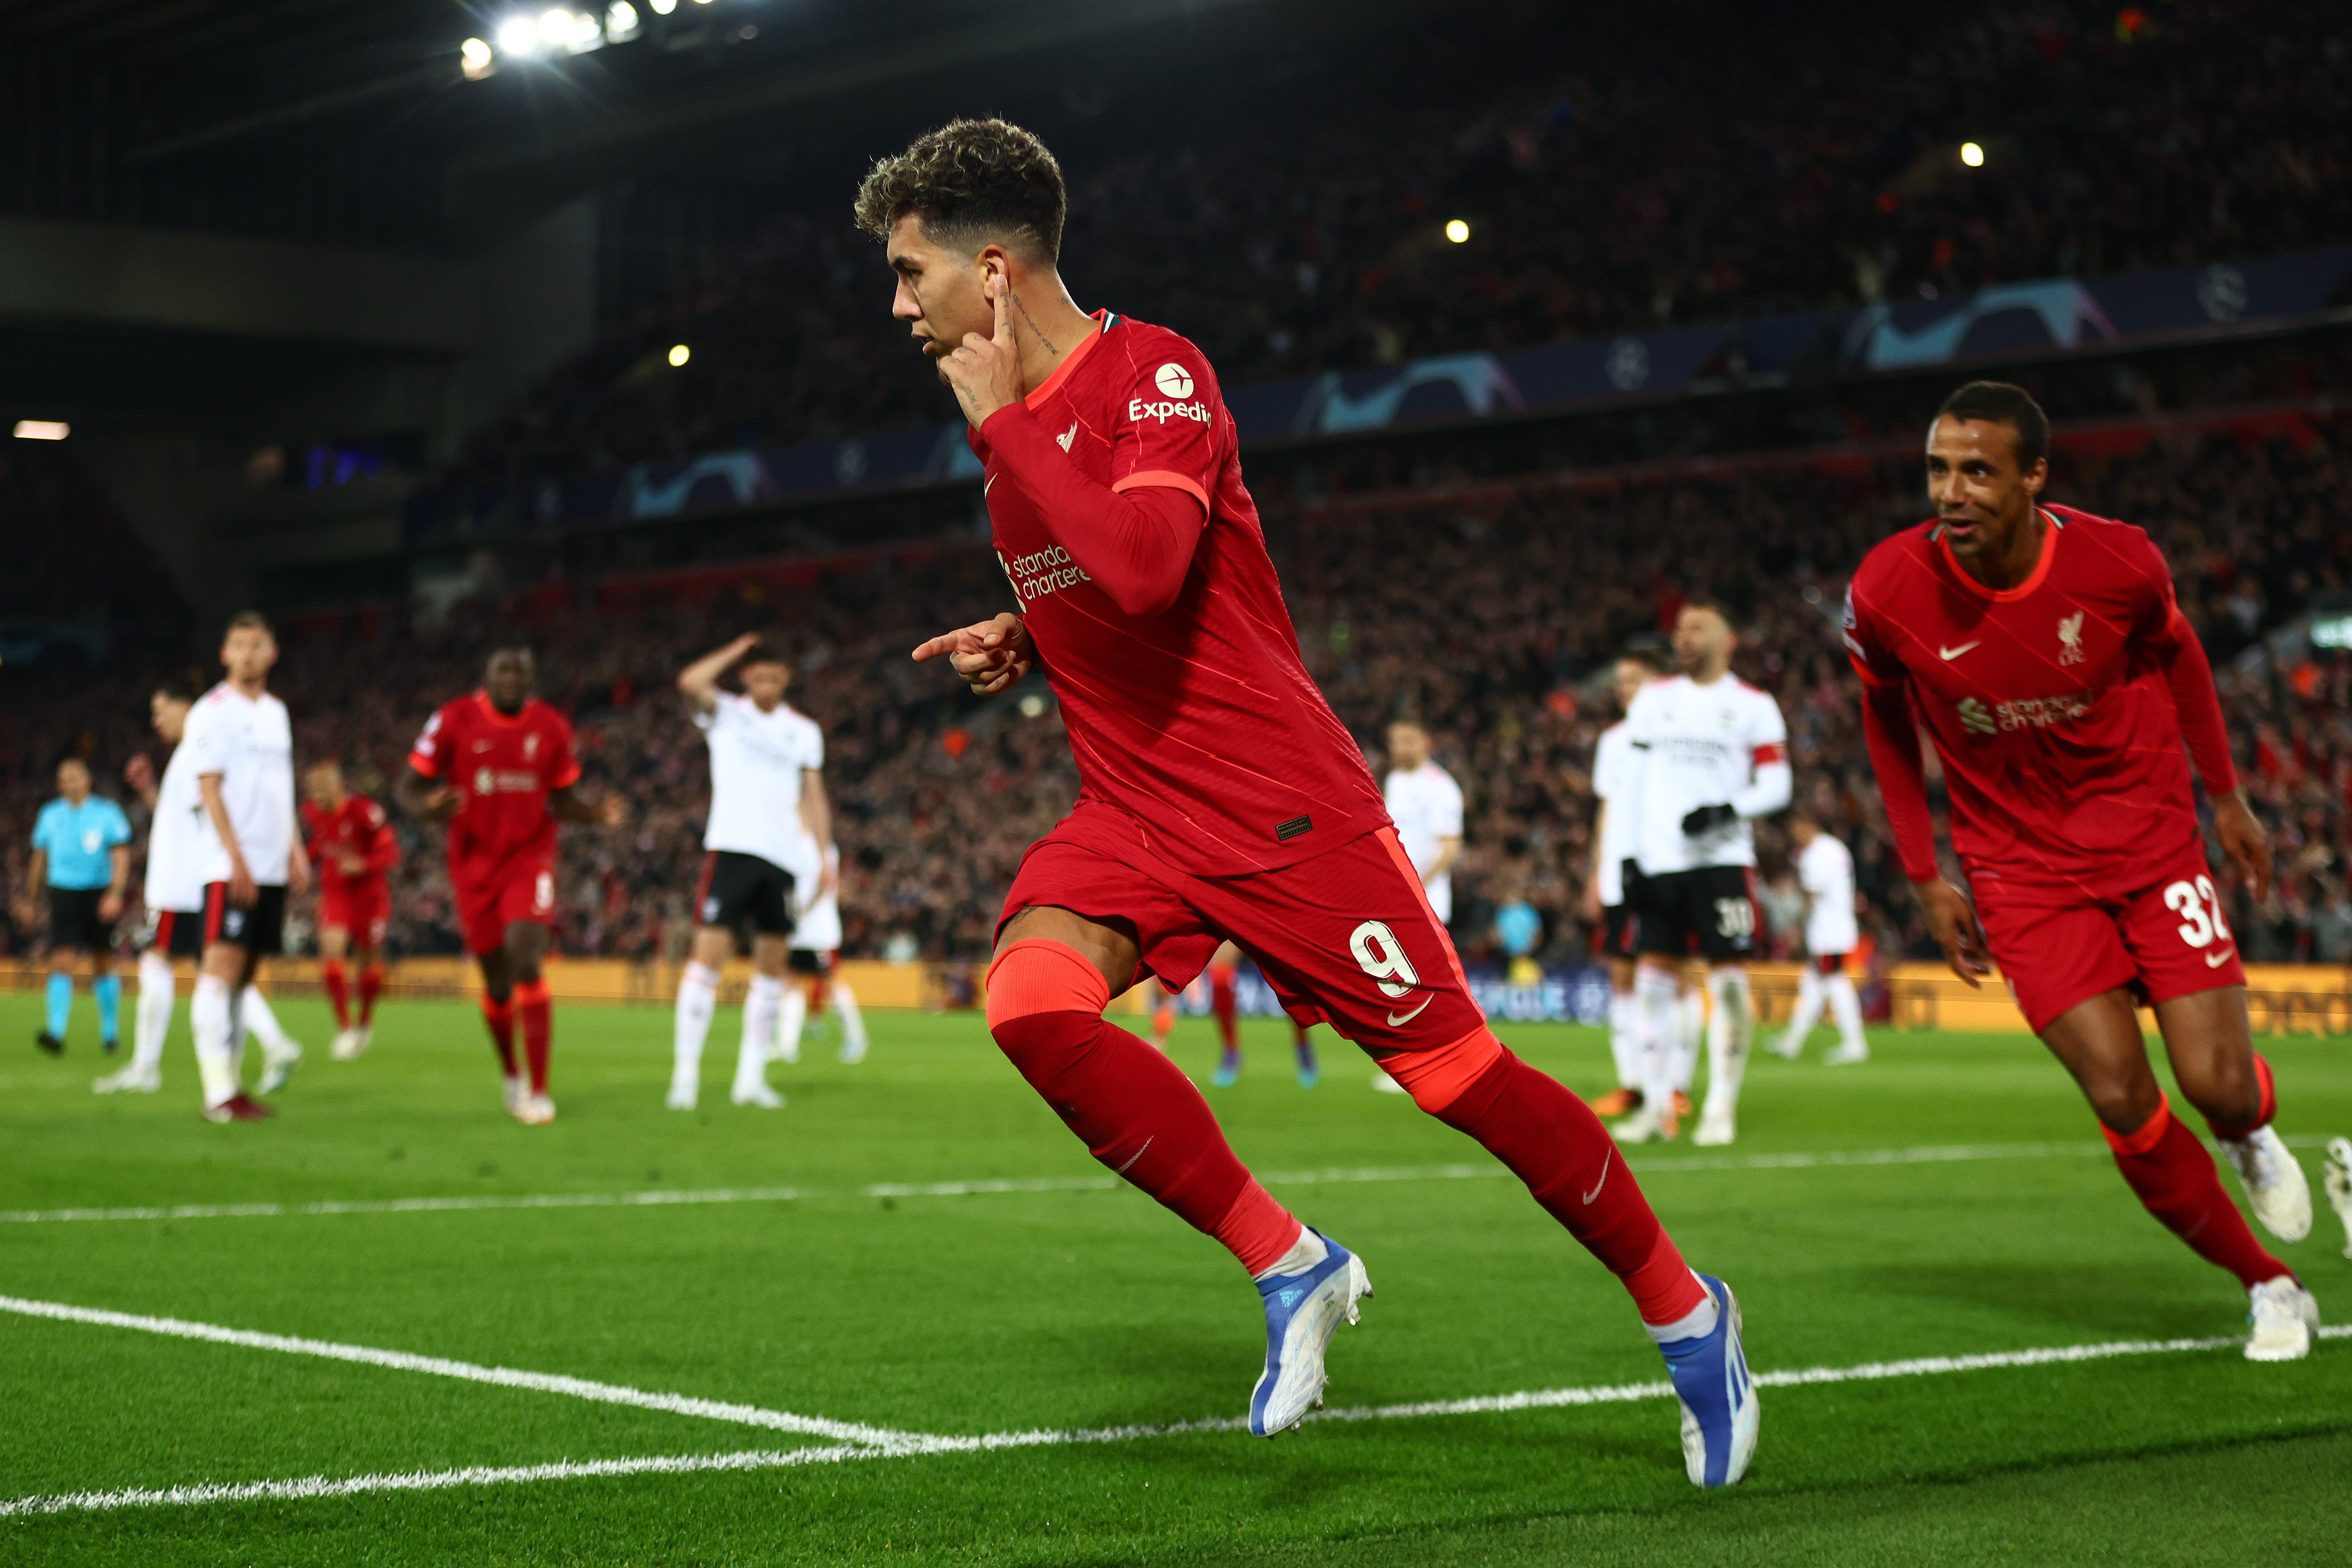 Liverpool overcame Benfica to reach the Champions League semi-finals